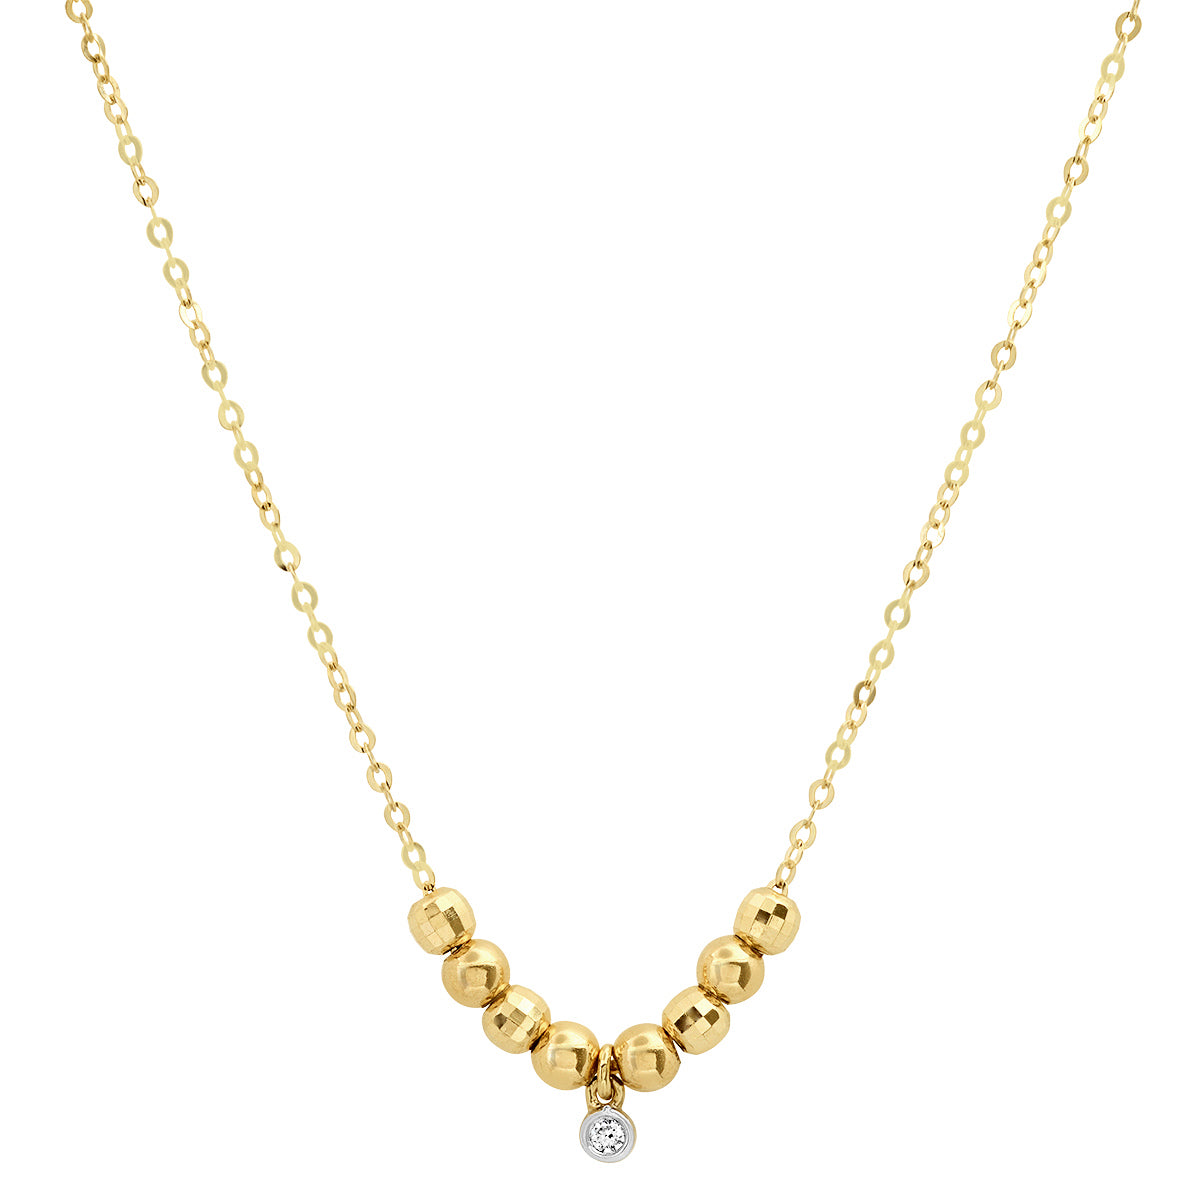 FIVE BEAD NECKLACE- 14k Gold - The Littl A$124.99 A$174.99 14k Rose Gold 14k  Yellow Gold Bridal (Jewellery Only)